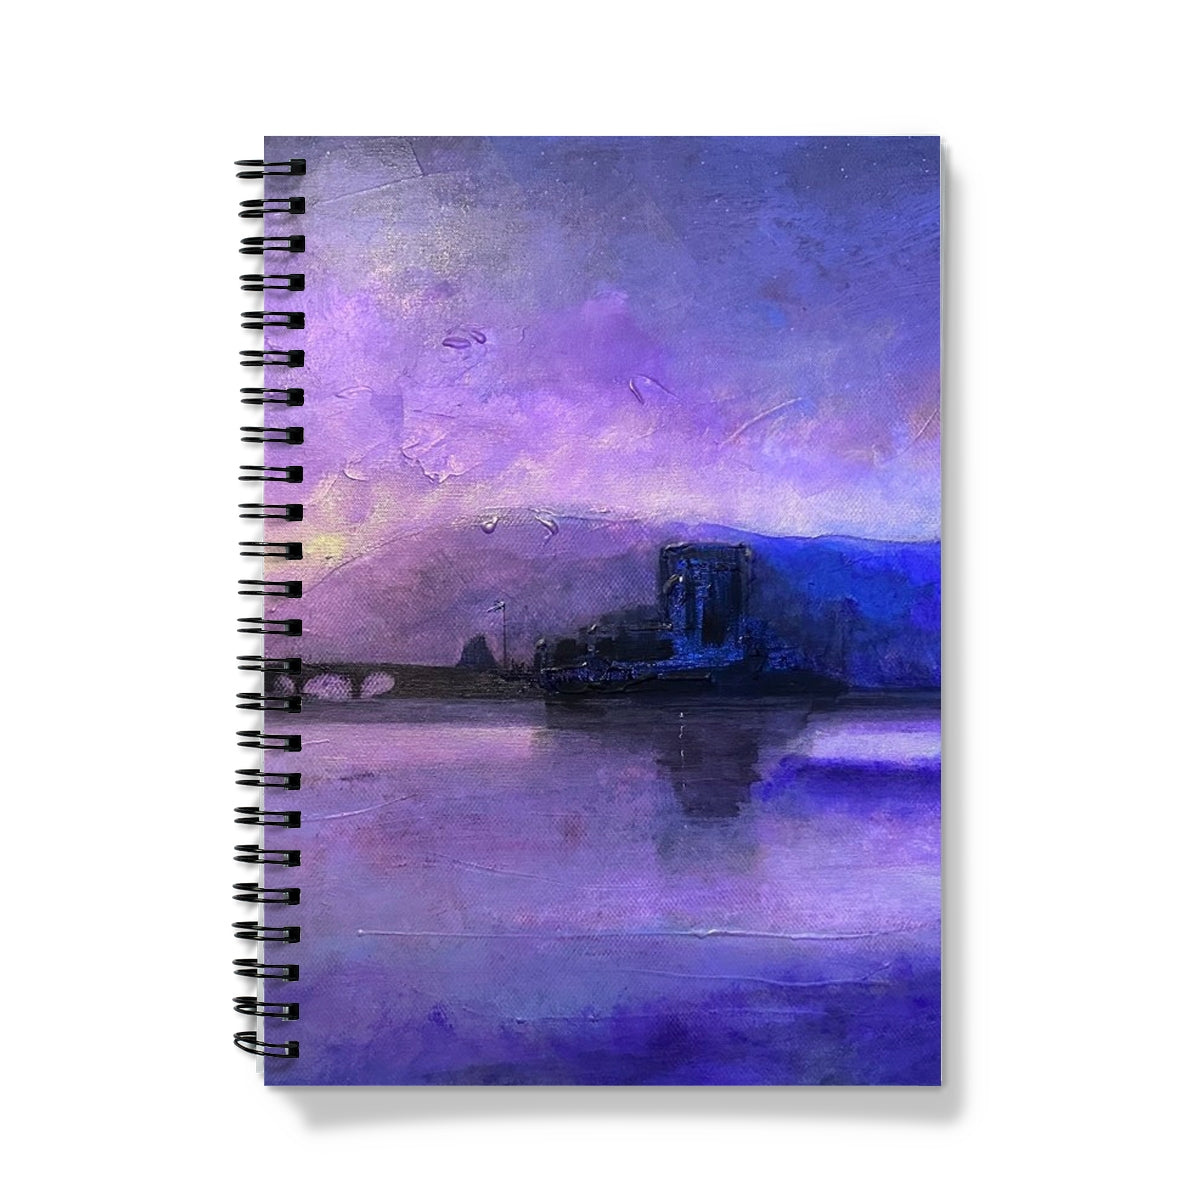 Eilean Donan Castle Moonset Art Gifts Notebook-Journals & Notebooks-Historic & Iconic Scotland Art Gallery-A5-Lined-Paintings, Prints, Homeware, Art Gifts From Scotland By Scottish Artist Kevin Hunter